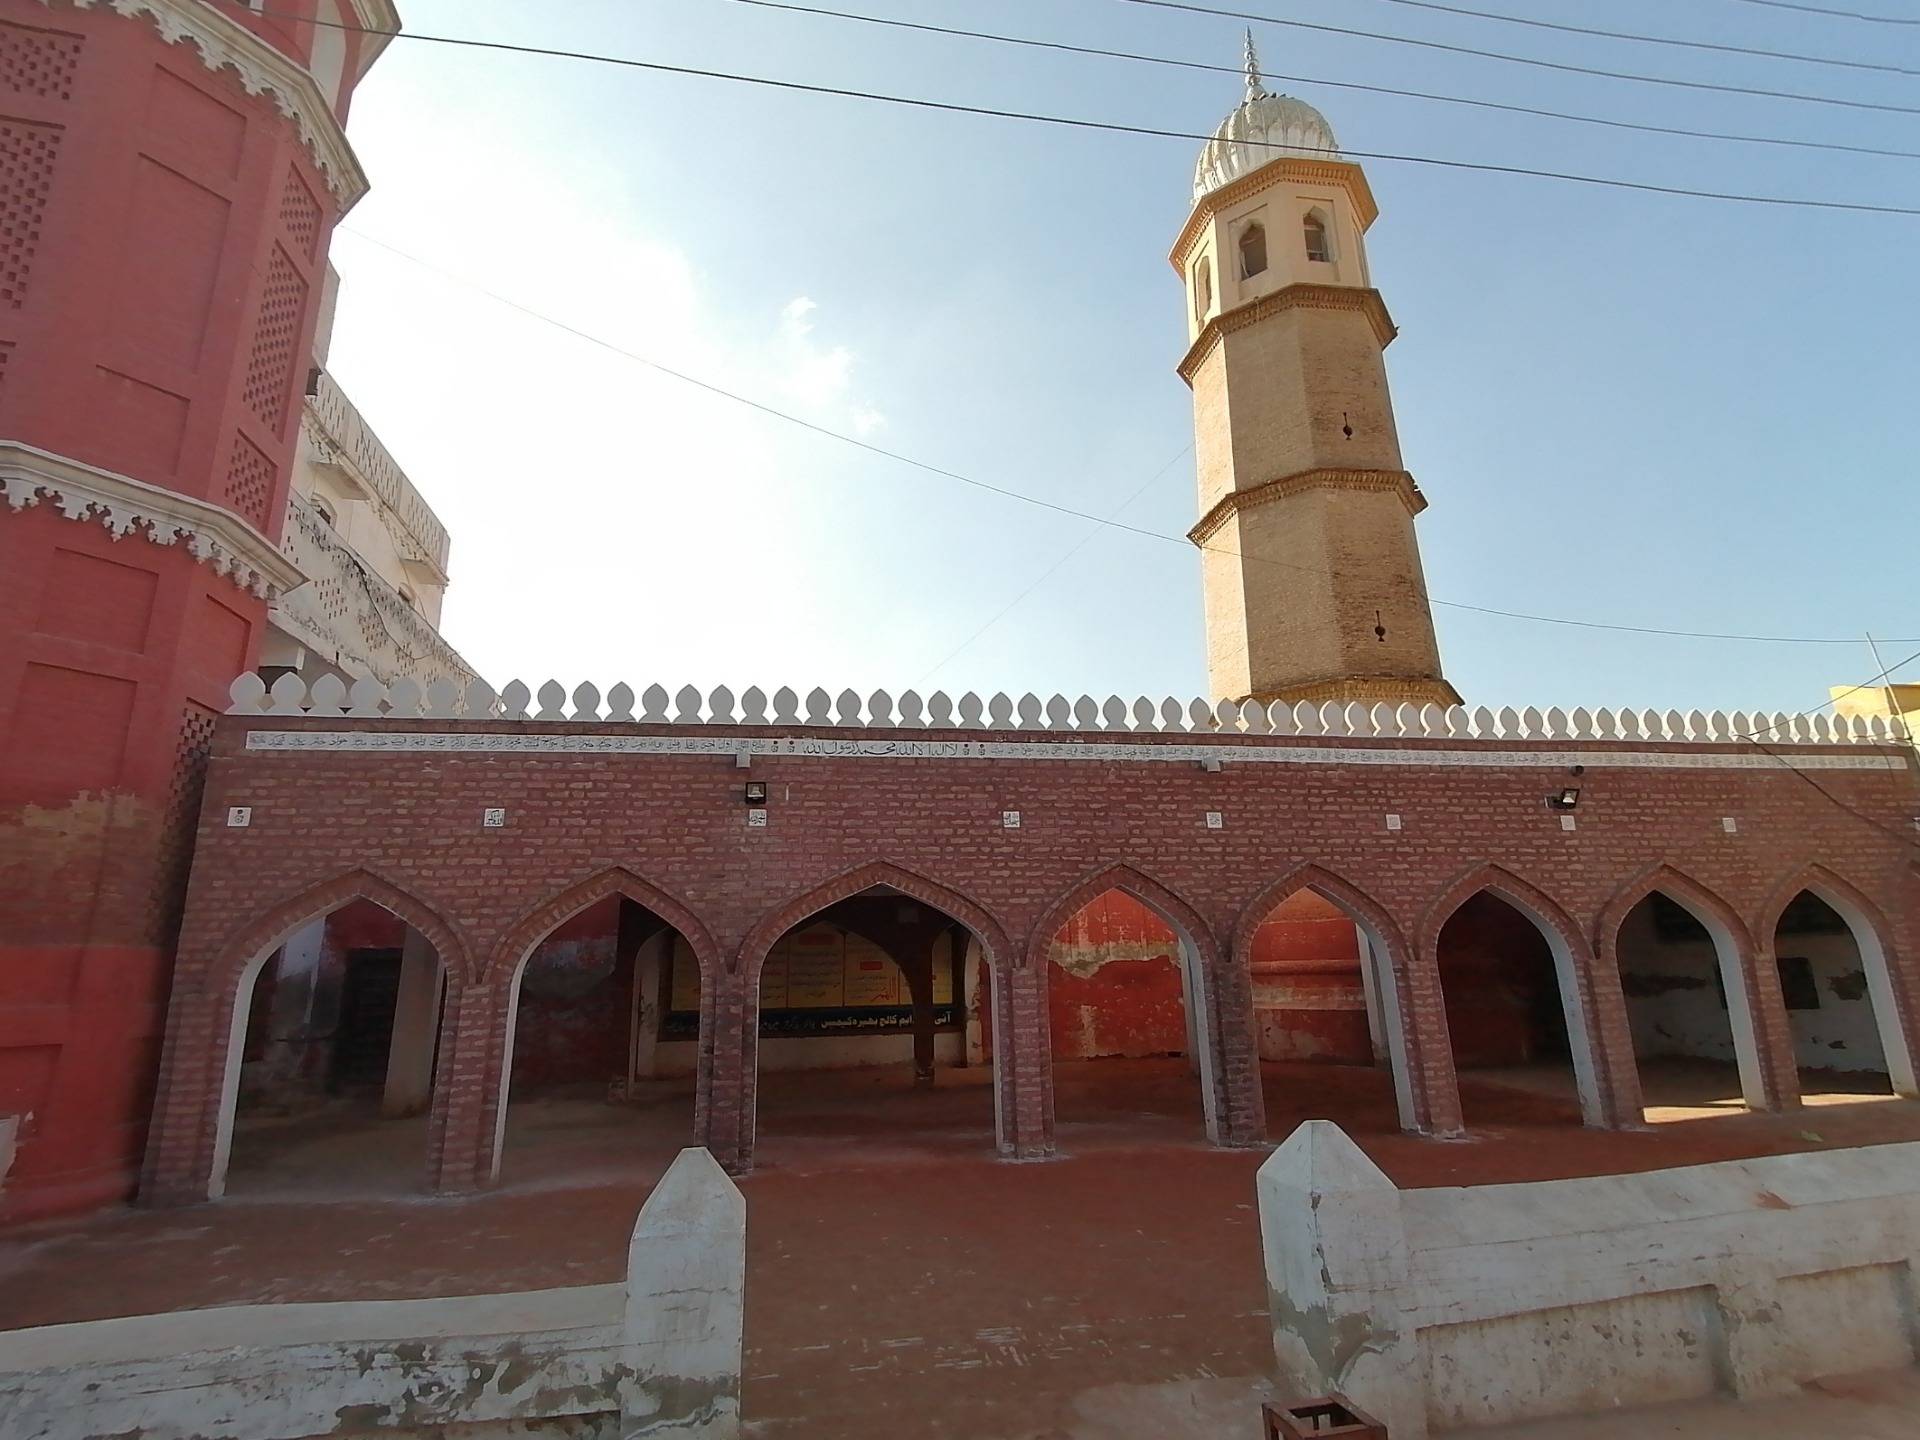 Sher Shah Suri Mosque A Jewel in Crown of Bhera City (1540 AD)